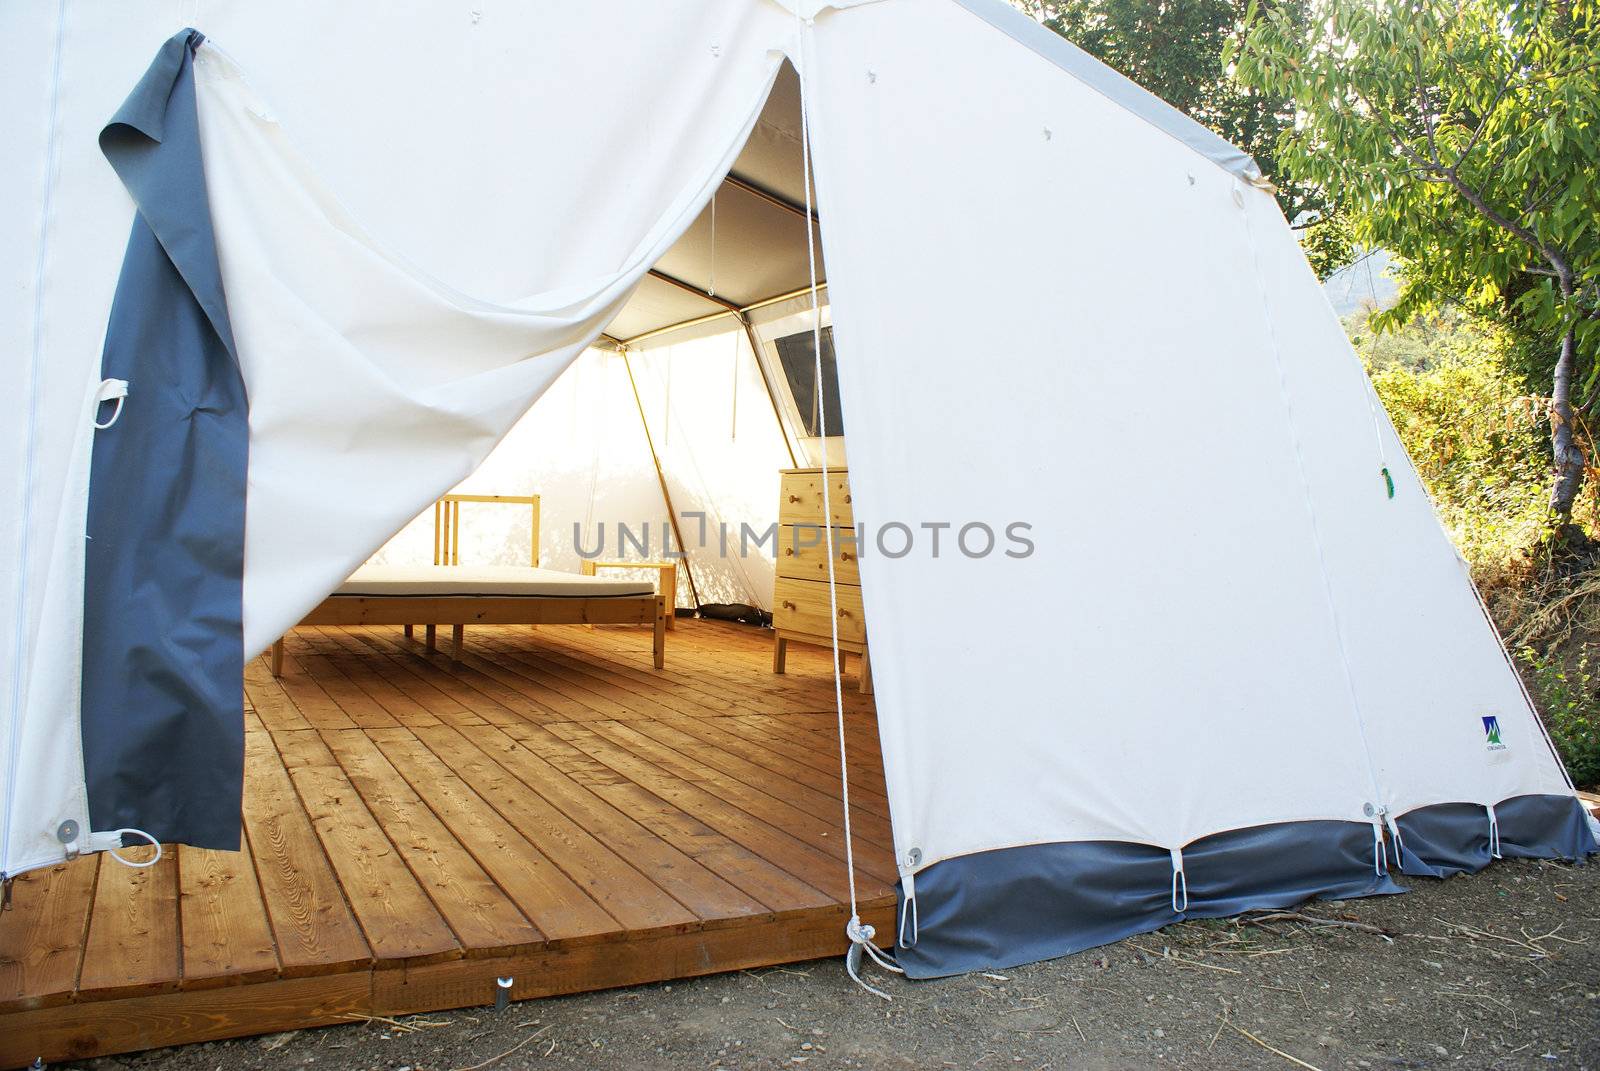 Large camping tent open. visibilie the interior